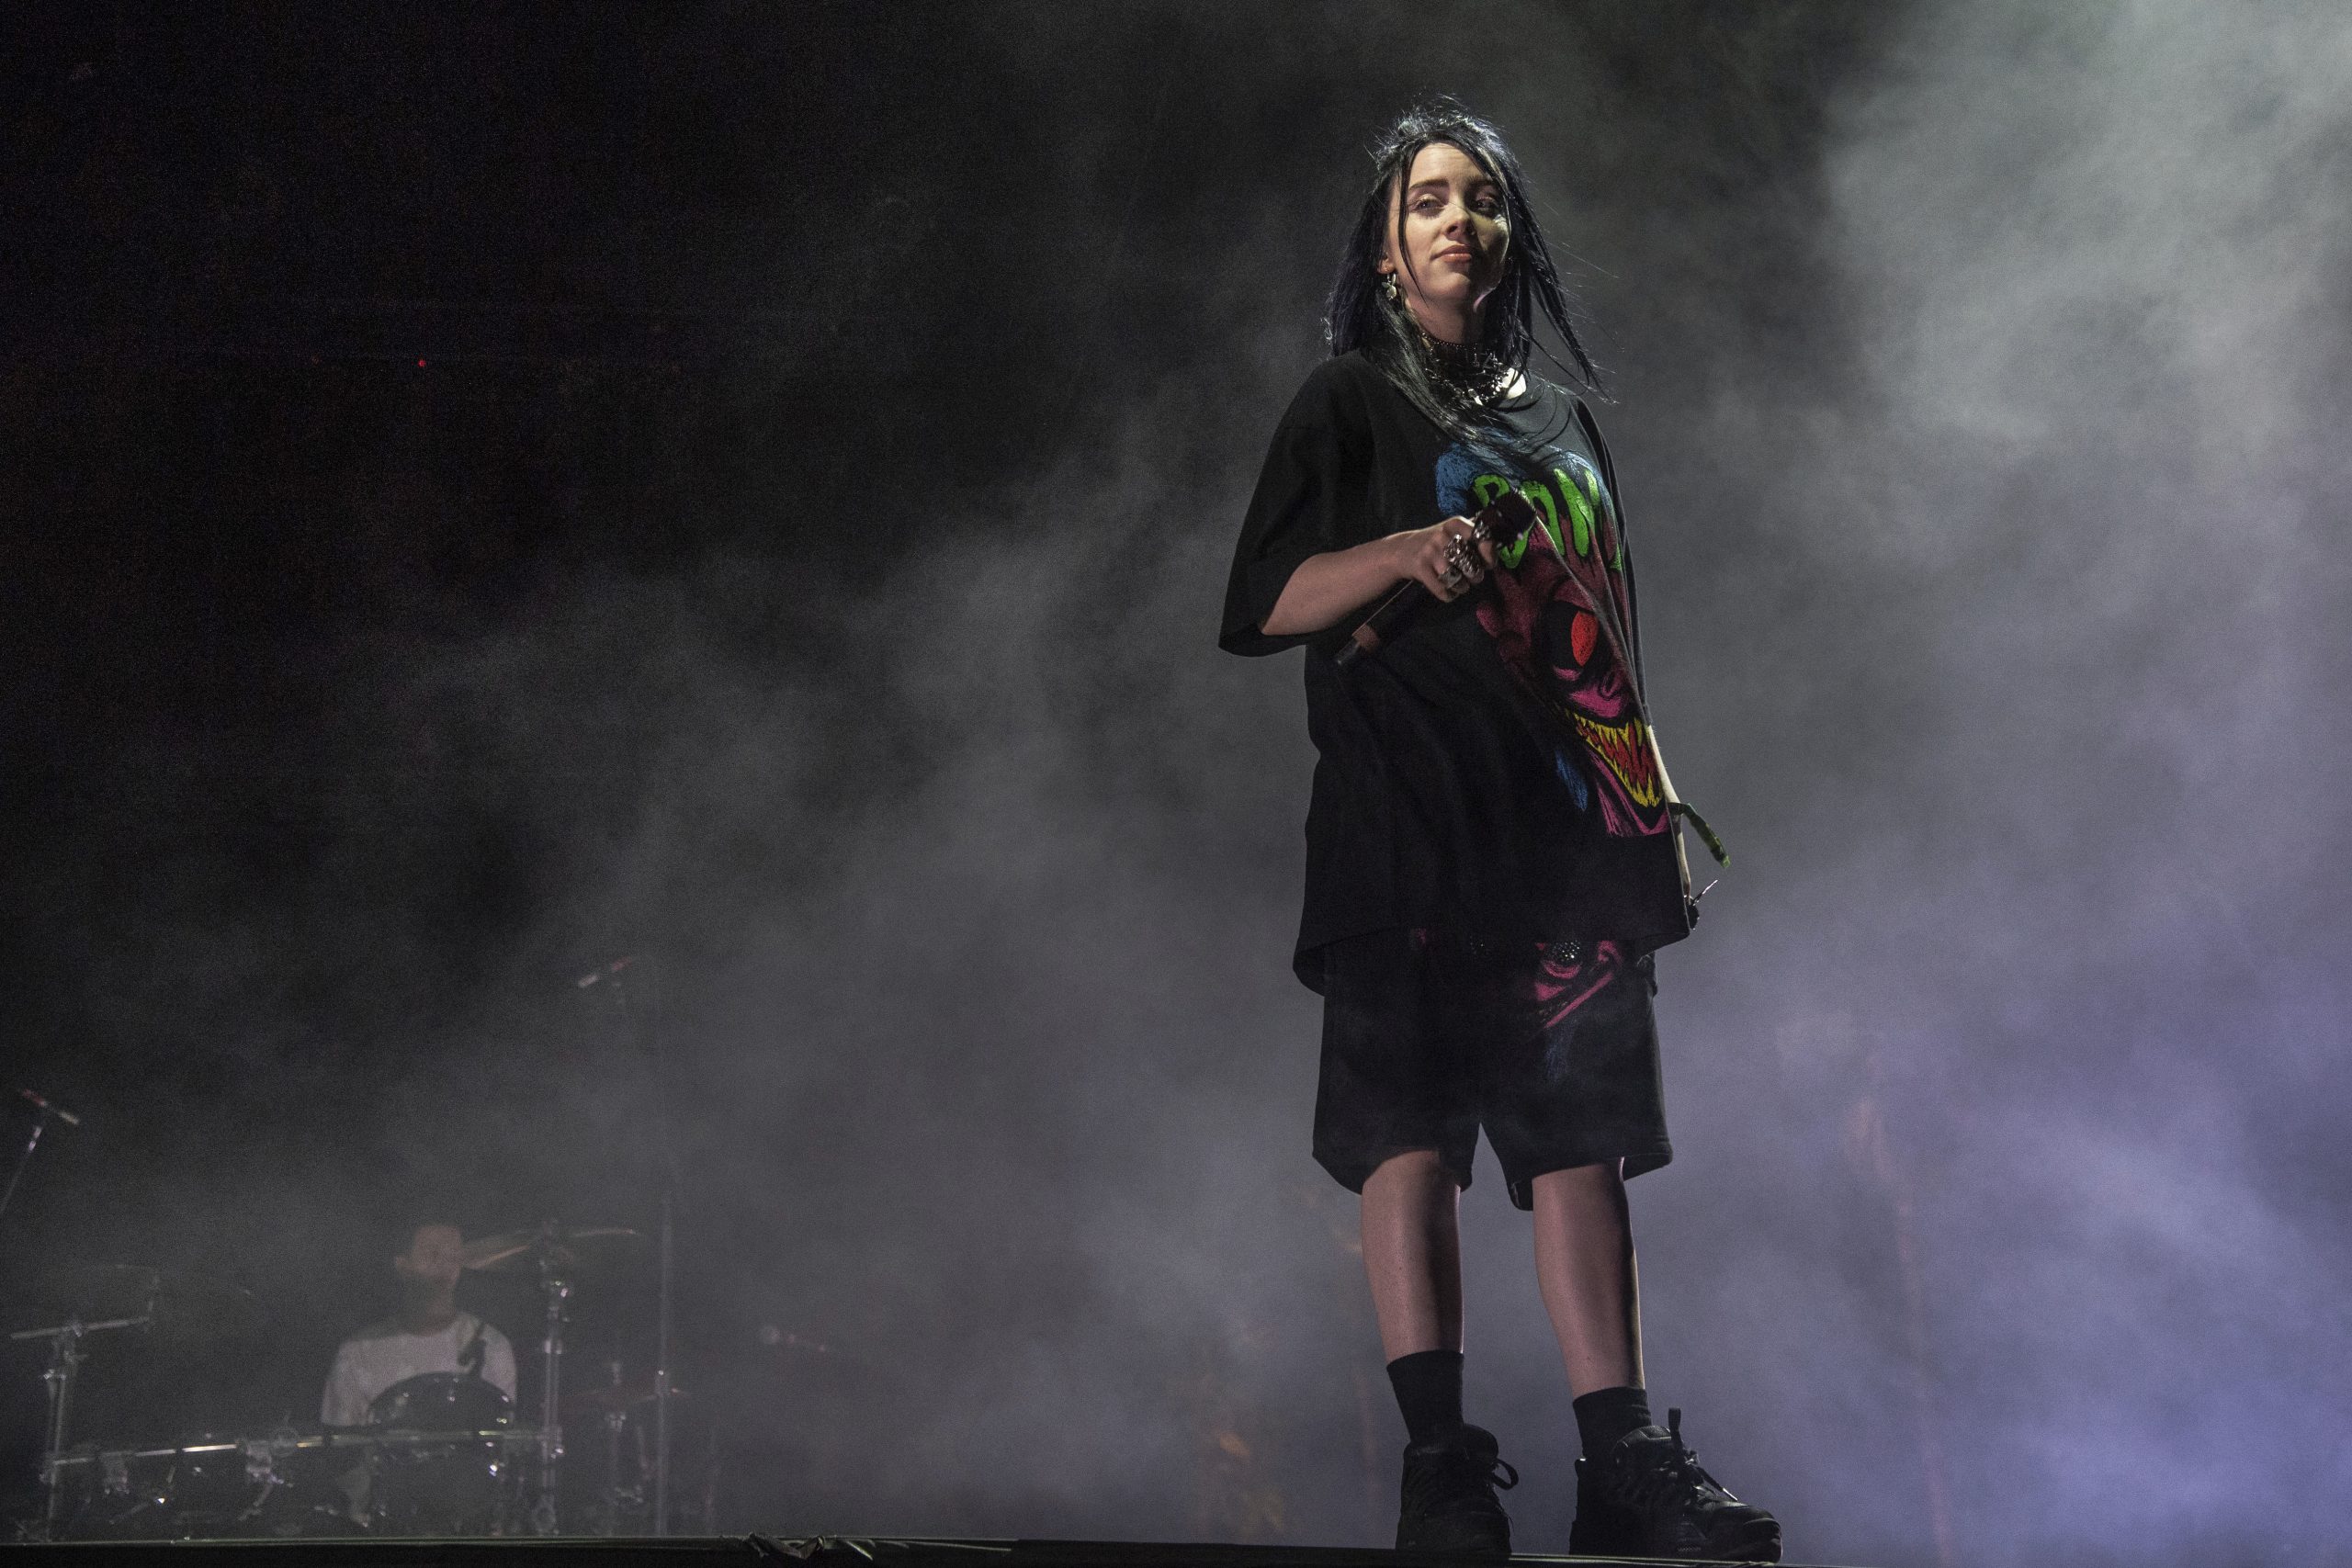 Billie Eilish performs at the Coachella Music & Arts Festival at the Empire Polo Club on Saturday, April 20, 2019, in Indio, Calif.